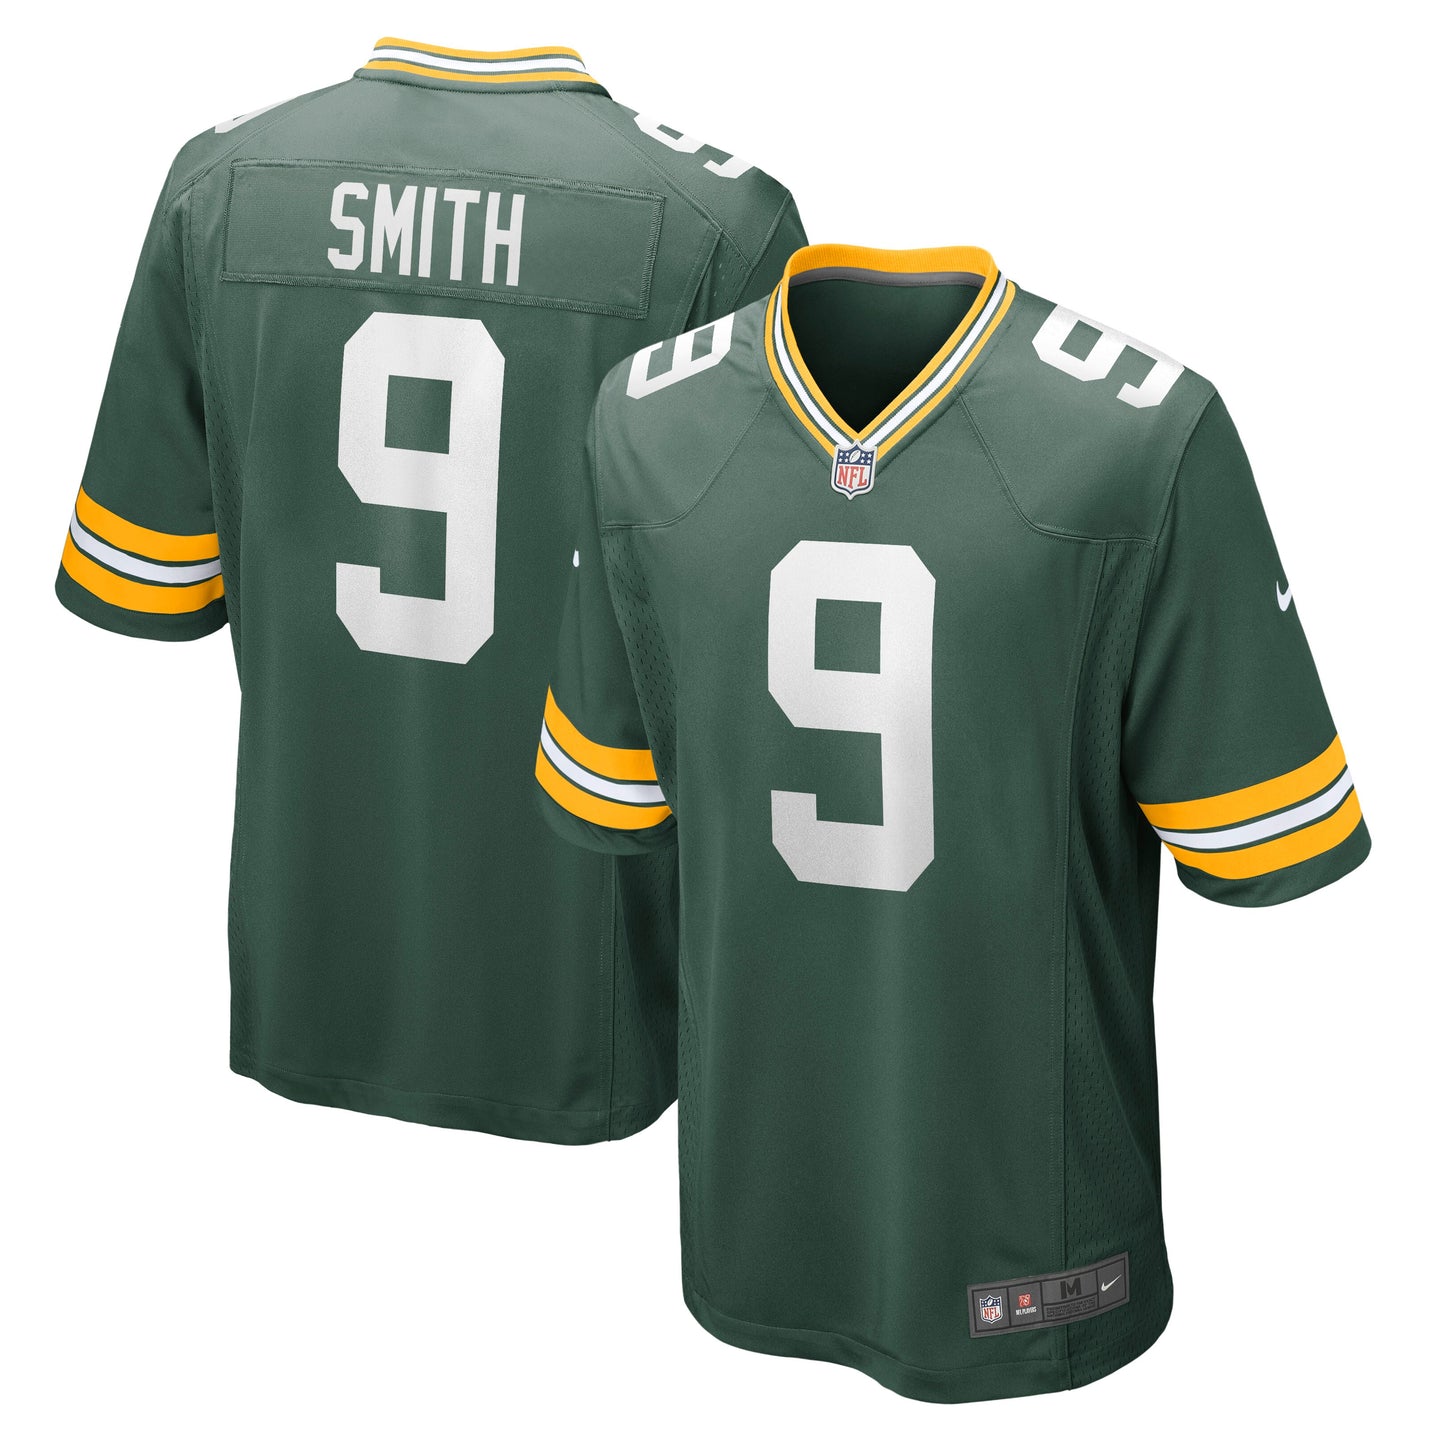 Jaylon Smith Green Bay Packers Nike Game Jersey - Green